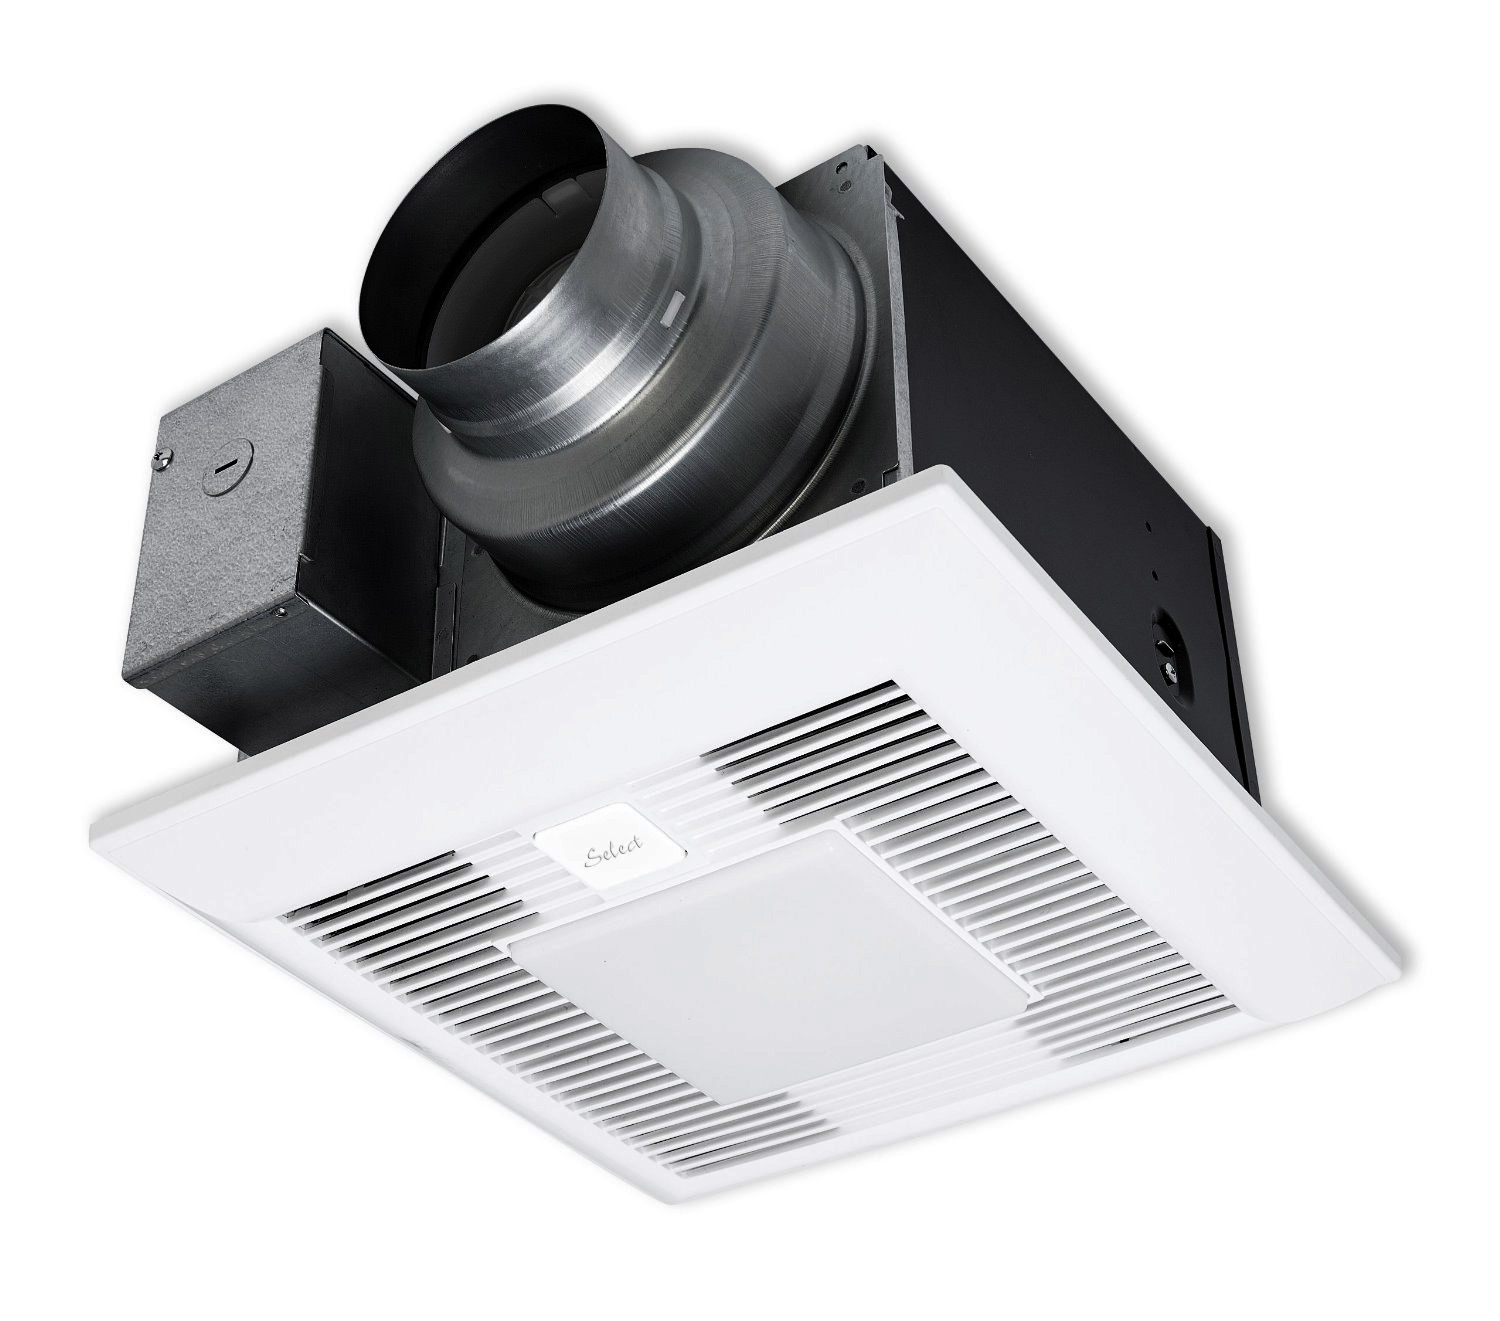 Panasonic Fans - WhisperGreen Select - FV-0511VKL2 Bathroom Exhaust Fan - 50-80-110 CFM - Single Speed - 4" & 6" Duct + LED Light - Click Image to Close